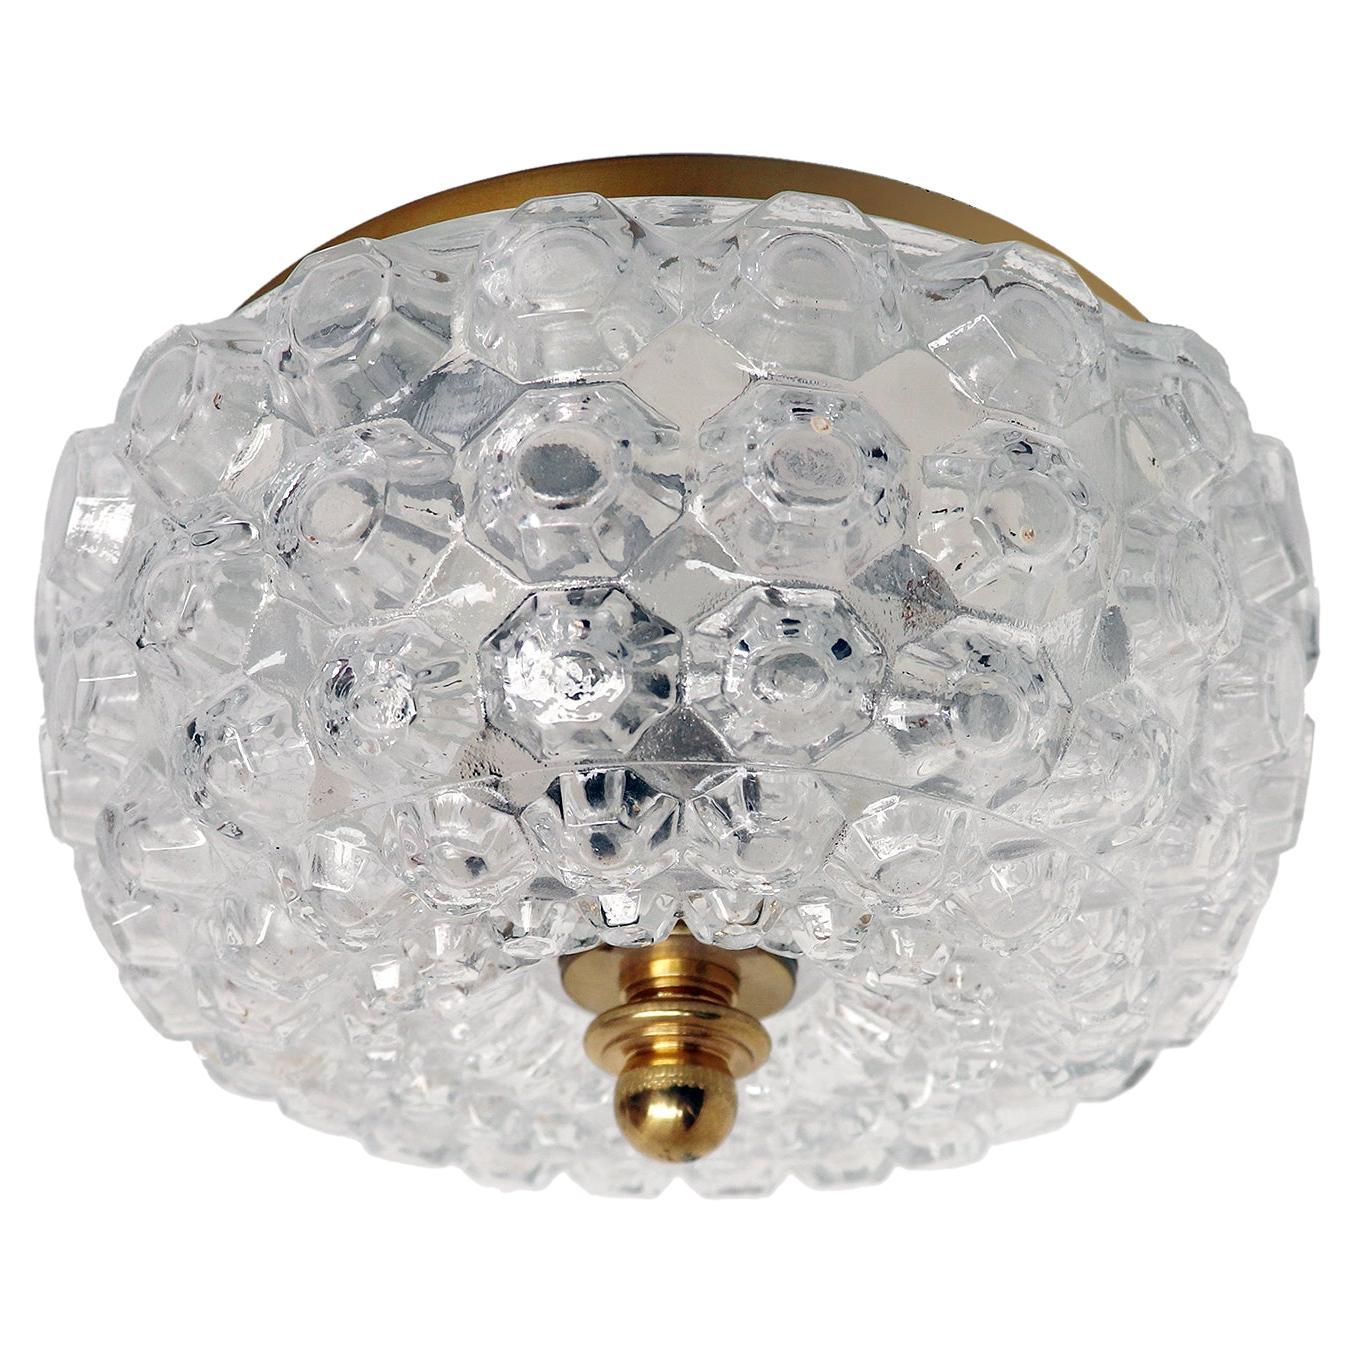 Elegant modernist flush mount ceiling light and wall sconce made of clear, thick and textured glass dome on a brass frame designed by Helena Tynell attr. Manufactured by Glashutte Limburg, Germany in the 1960s. 

Design: Helena Tynell attr.